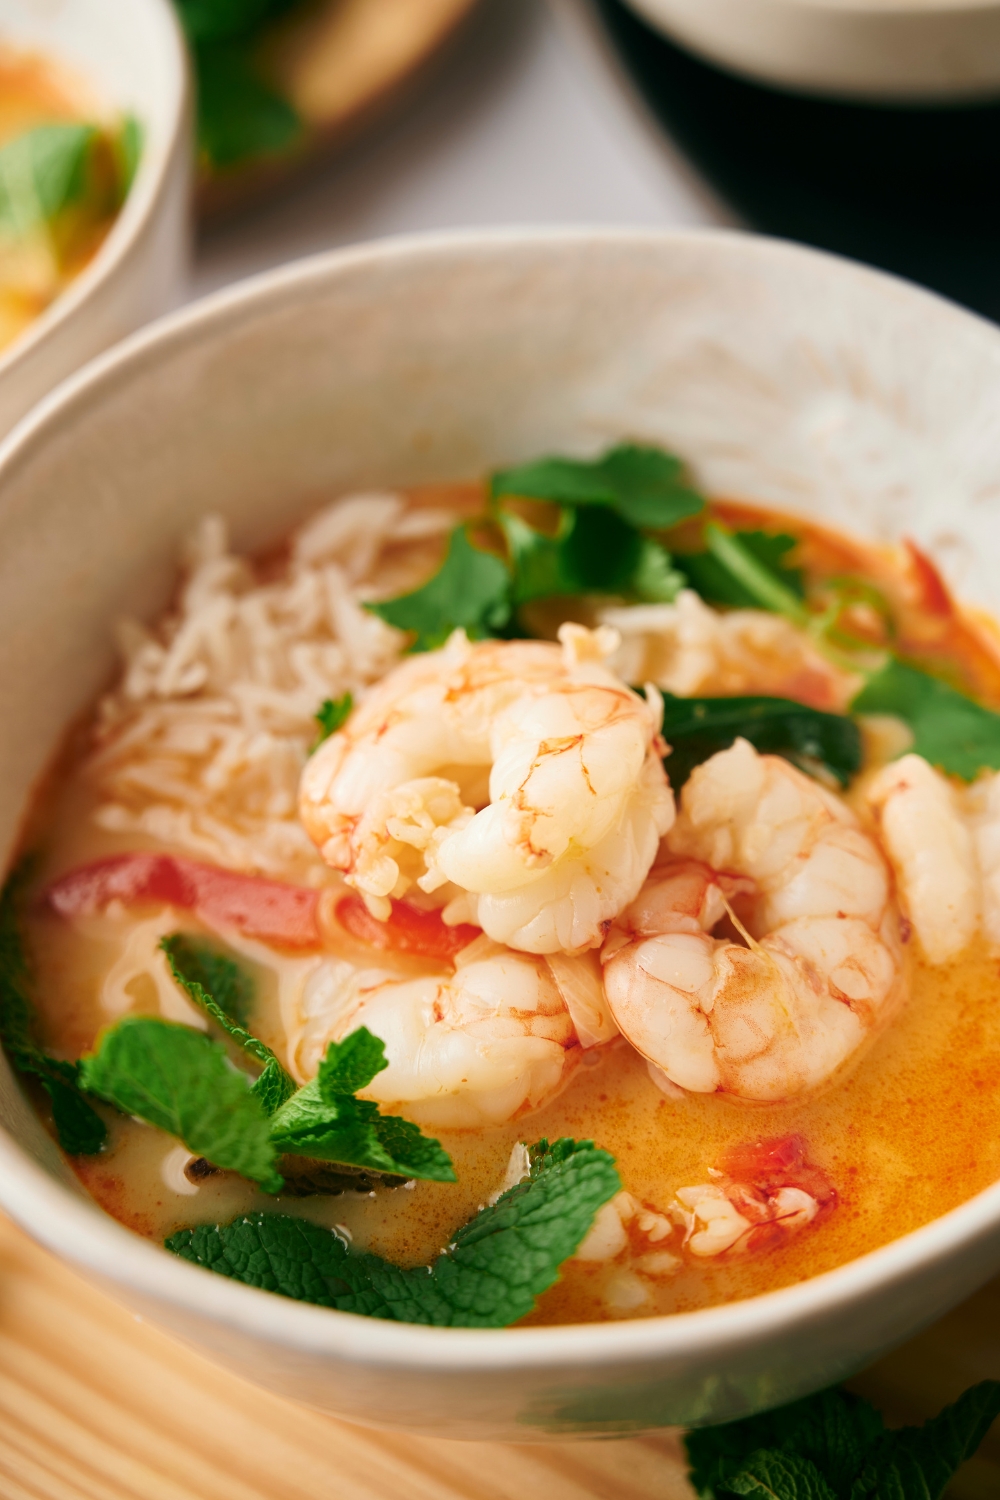 Shrimp in part of a white bowl that is filled with soup.